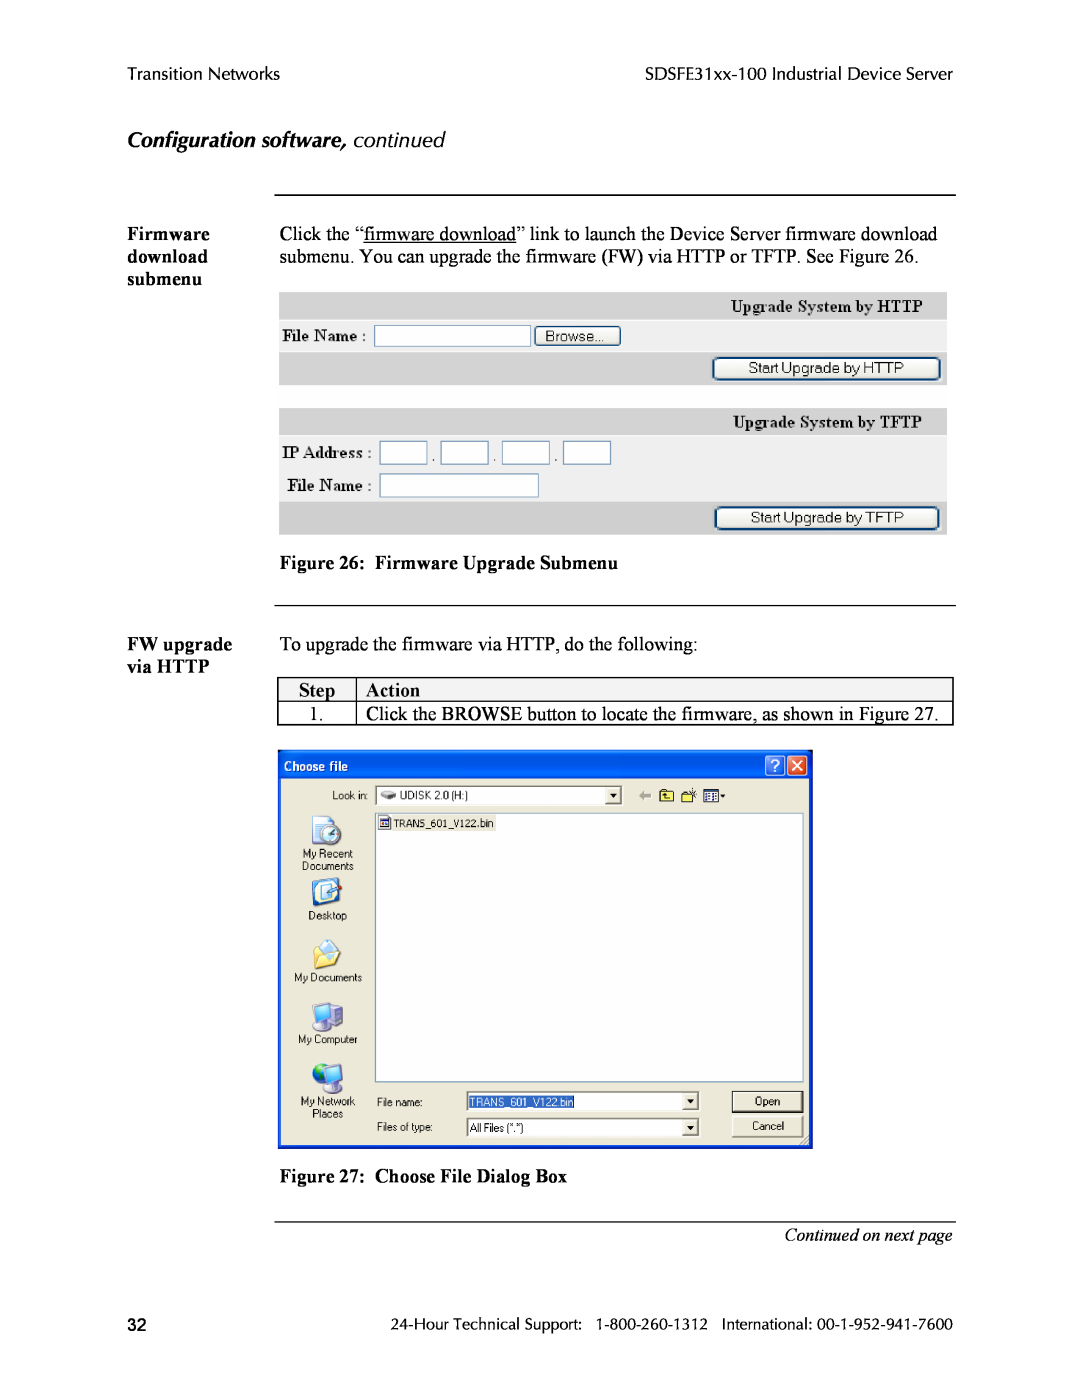 Transition Networks RS-232-TO-100BASE-FX download, Firmware Upgrade Submenu, Choose File Dialog Box, submenu, Step 